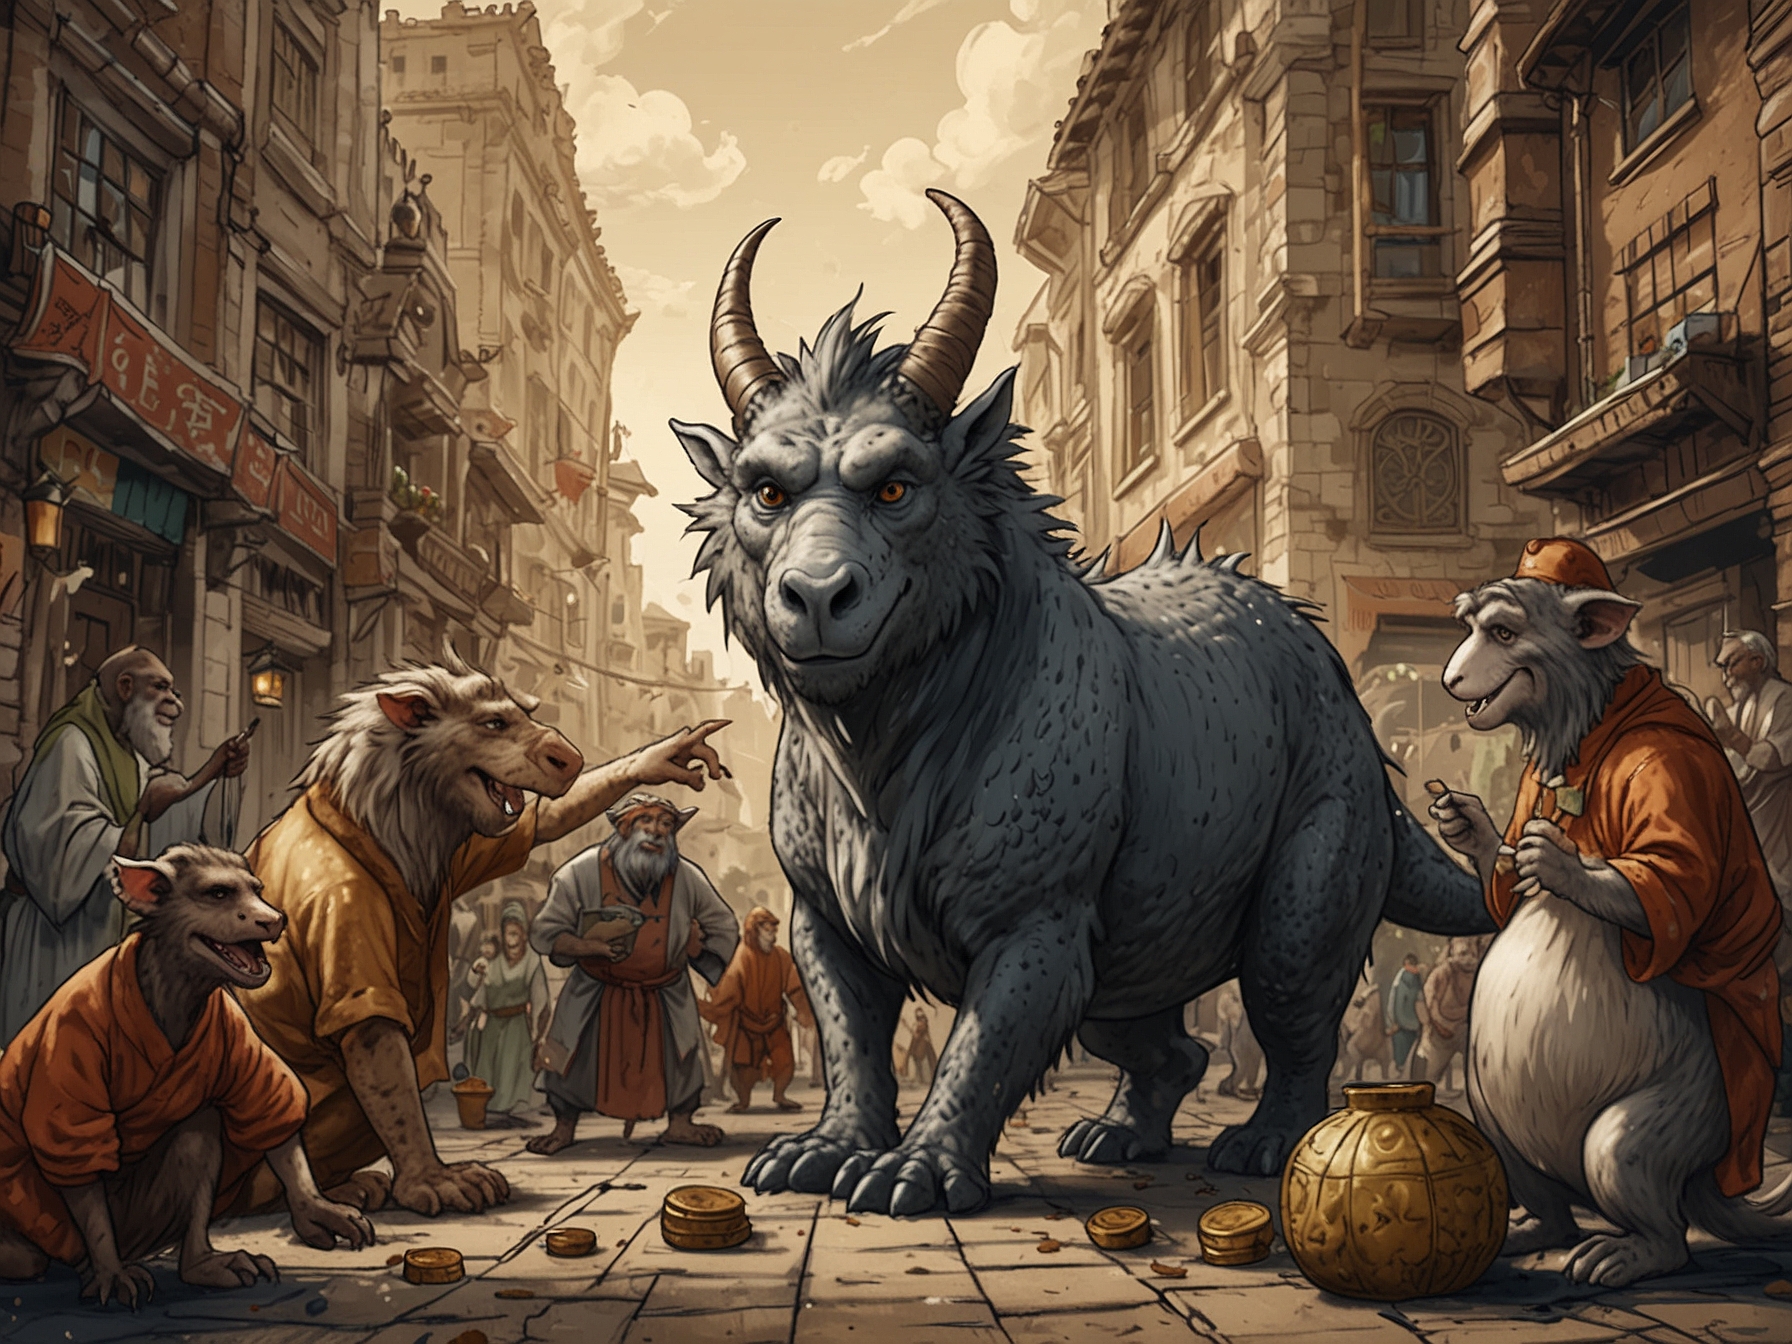 Artistic depiction of a Dragon confidently leading a group, a Rat counting coins, a Horse networking at an event, a Goat enjoying harmonious relationships, and a Monkey solving problems creatively.